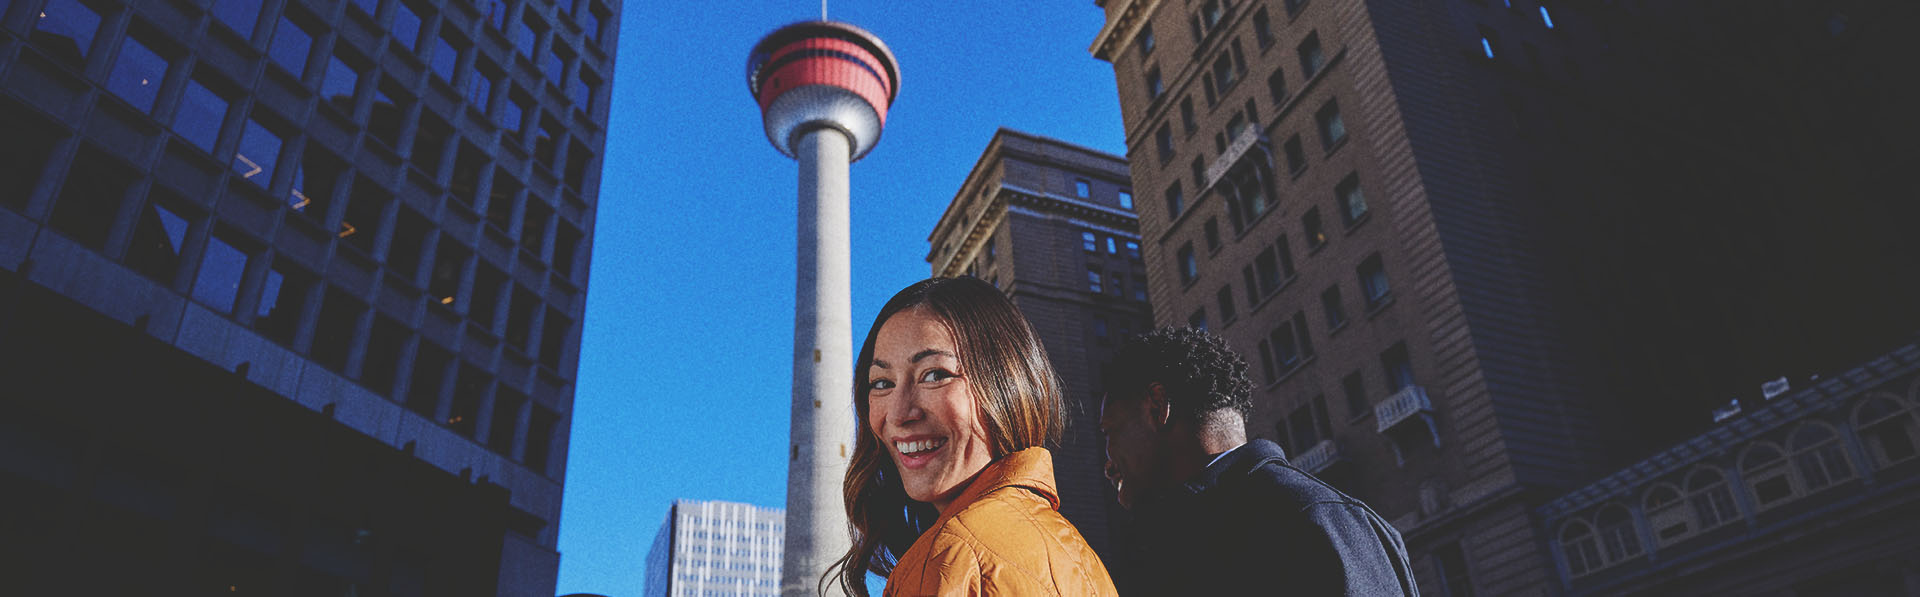 couple listening to a street busker play guitar in front the the Calgary Tower